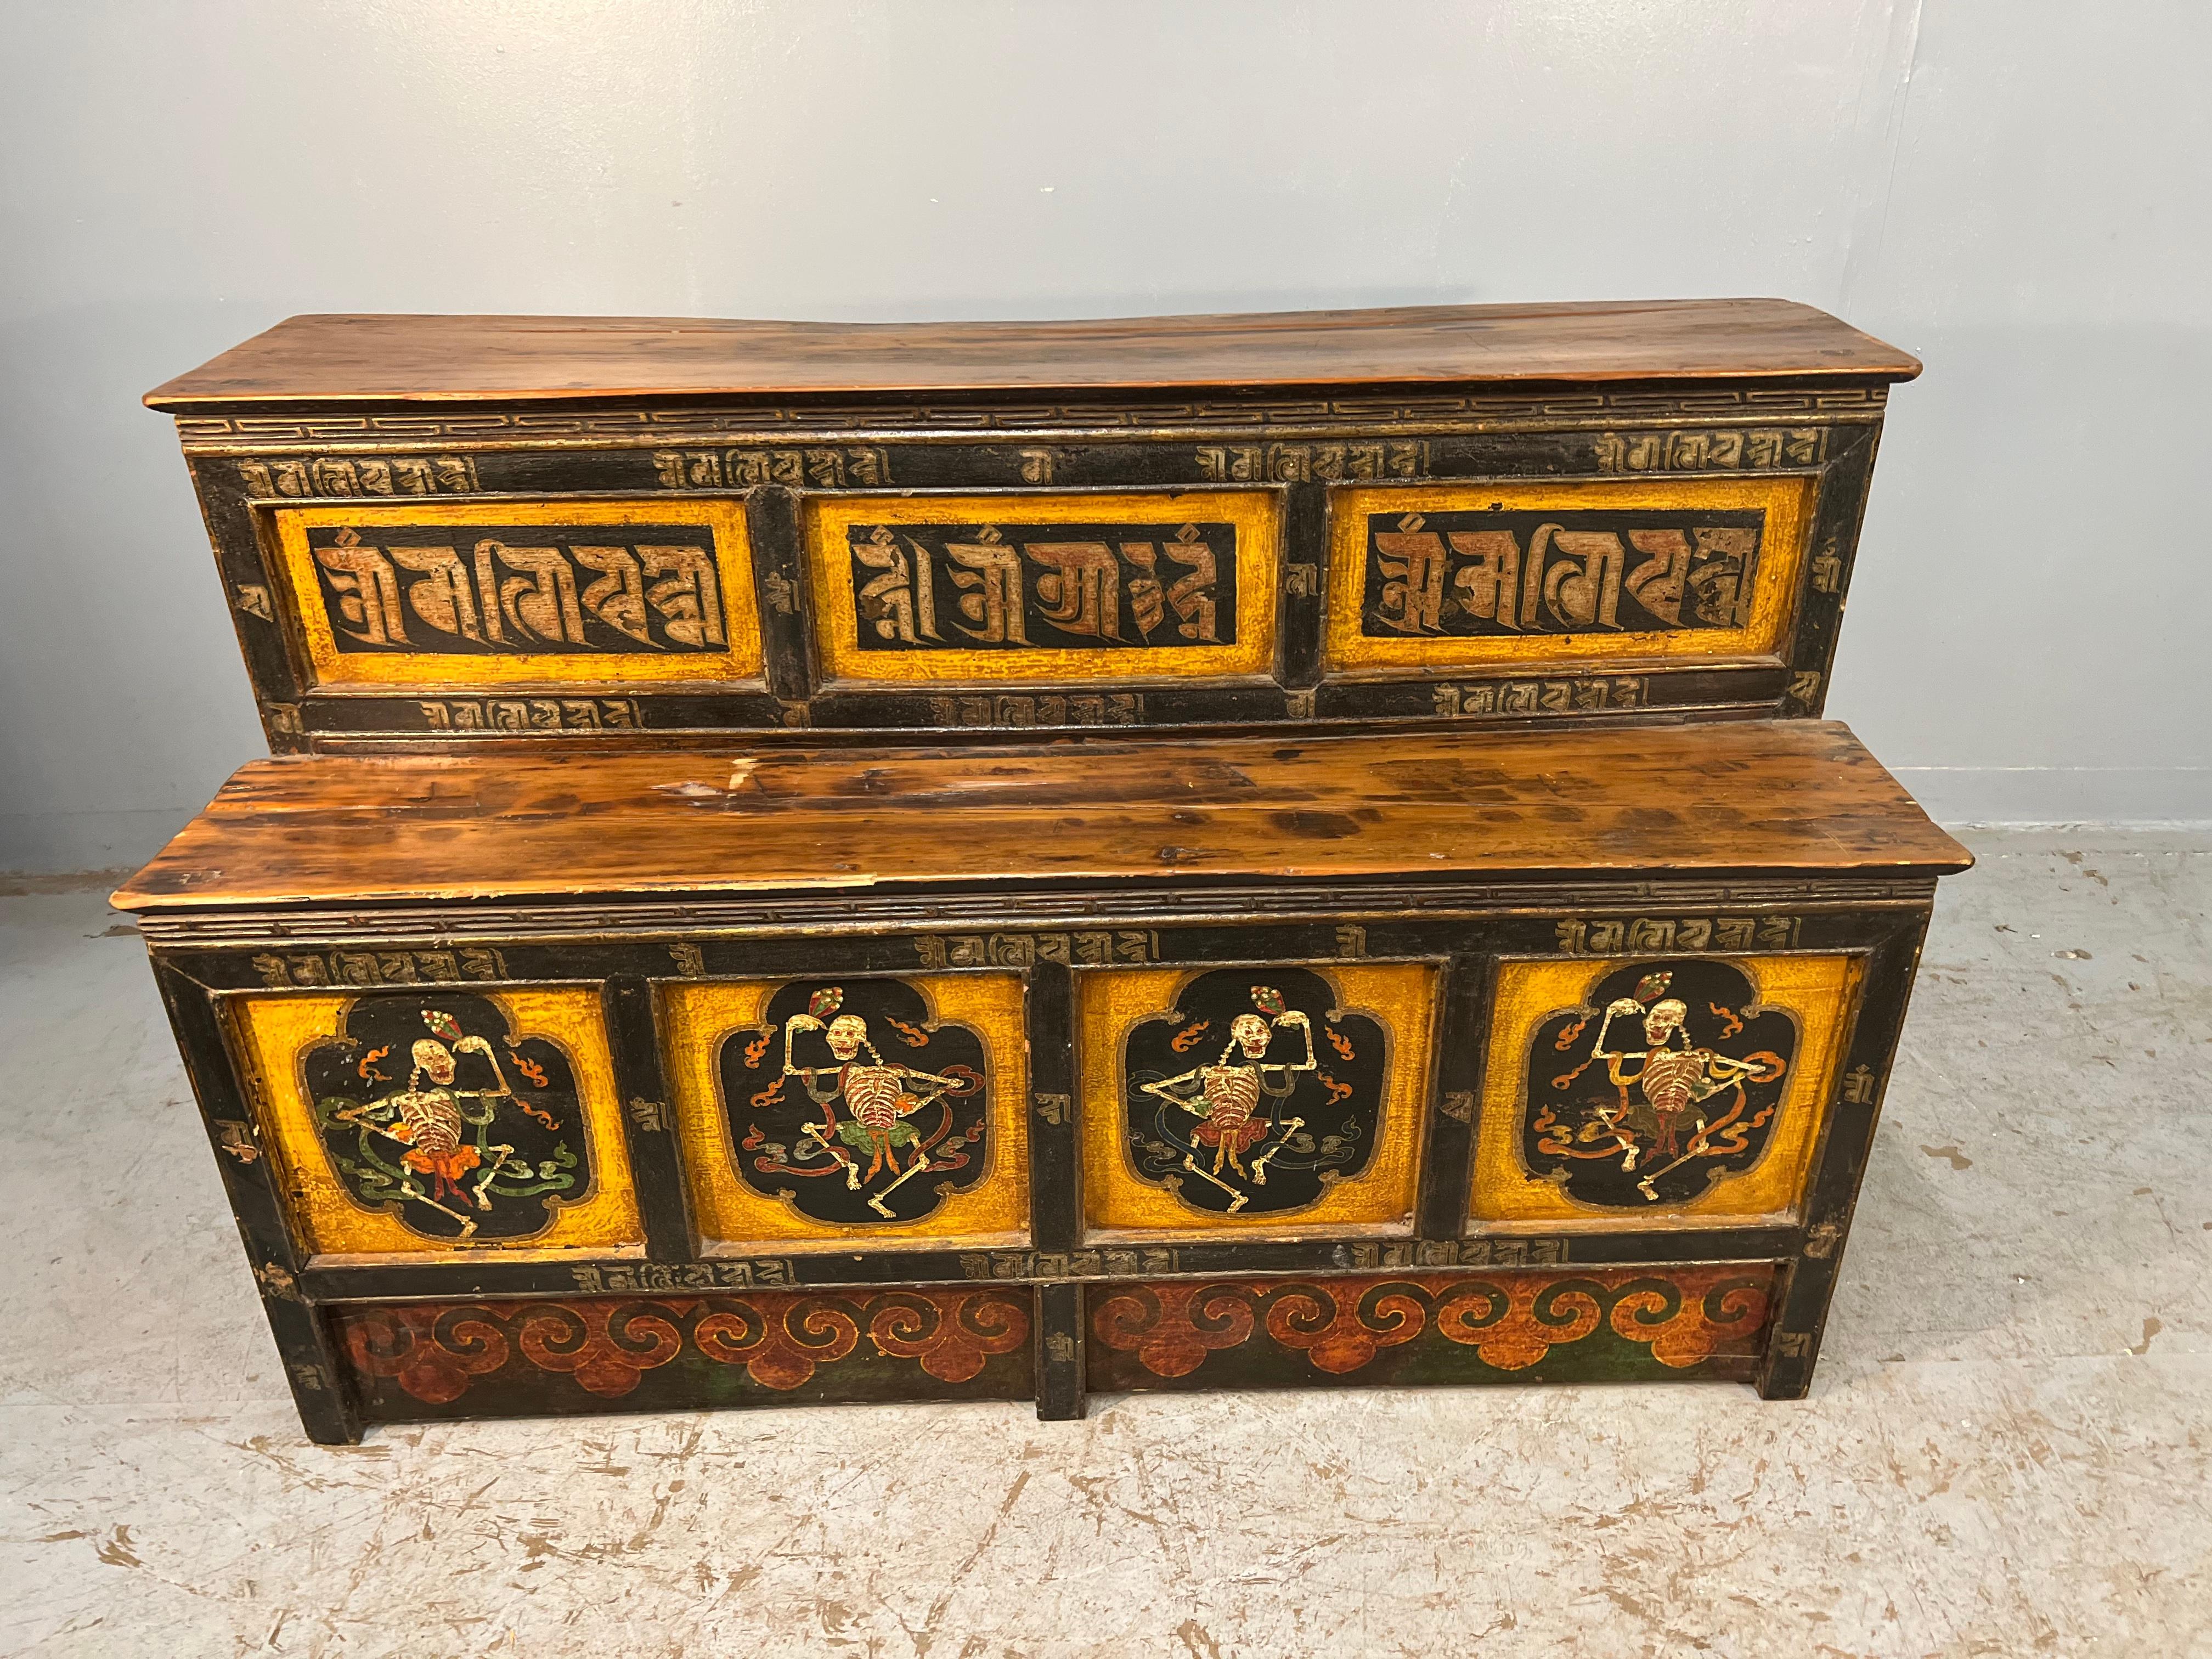 A Tibetan polychromed alter table with painted skeletons. This highly decorative two tier table is painted in black, and yellow with red and green accents. 
It would make a great serving piece, hall piece, accent piece or an alter table. 
It dates